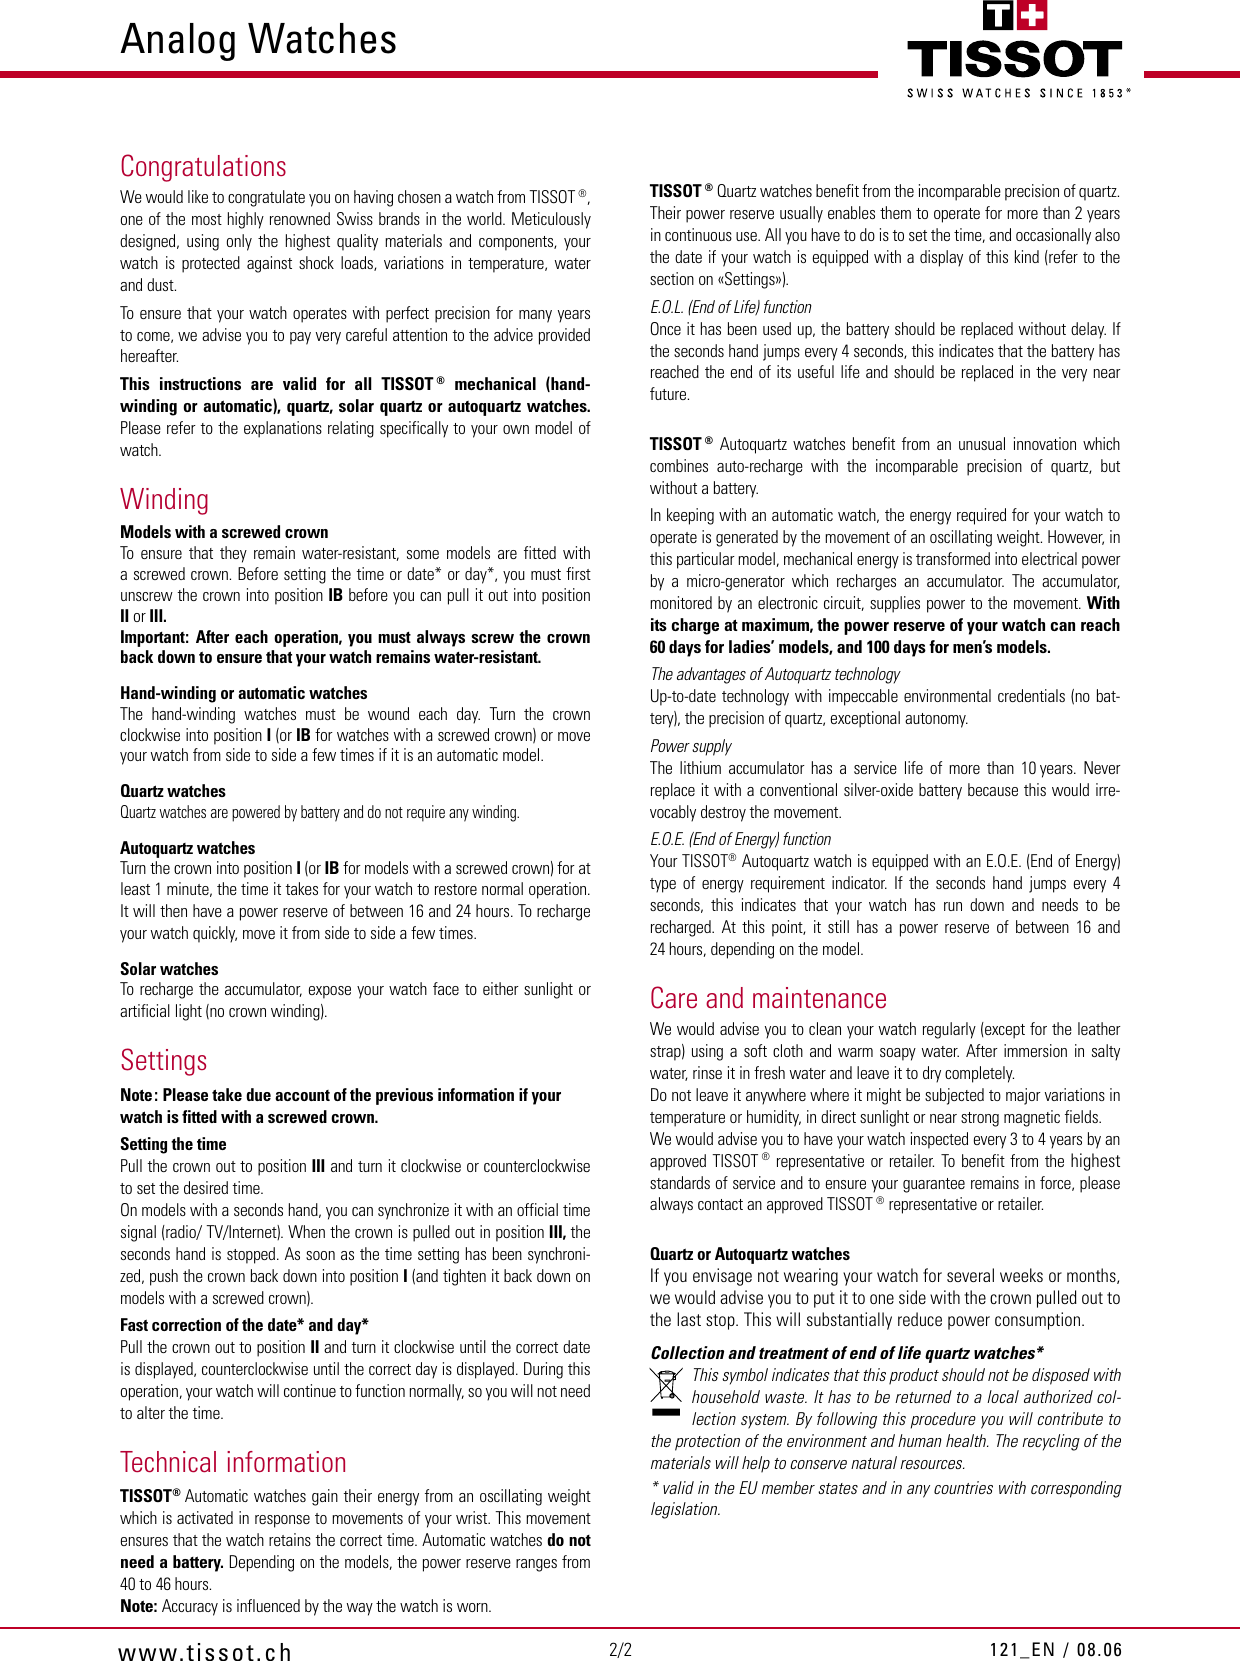 Page 2 of 2 - Tissot Tissot-Analog-Watch-Users-Manual- 121-en  Tissot-analog-watch-users-manual